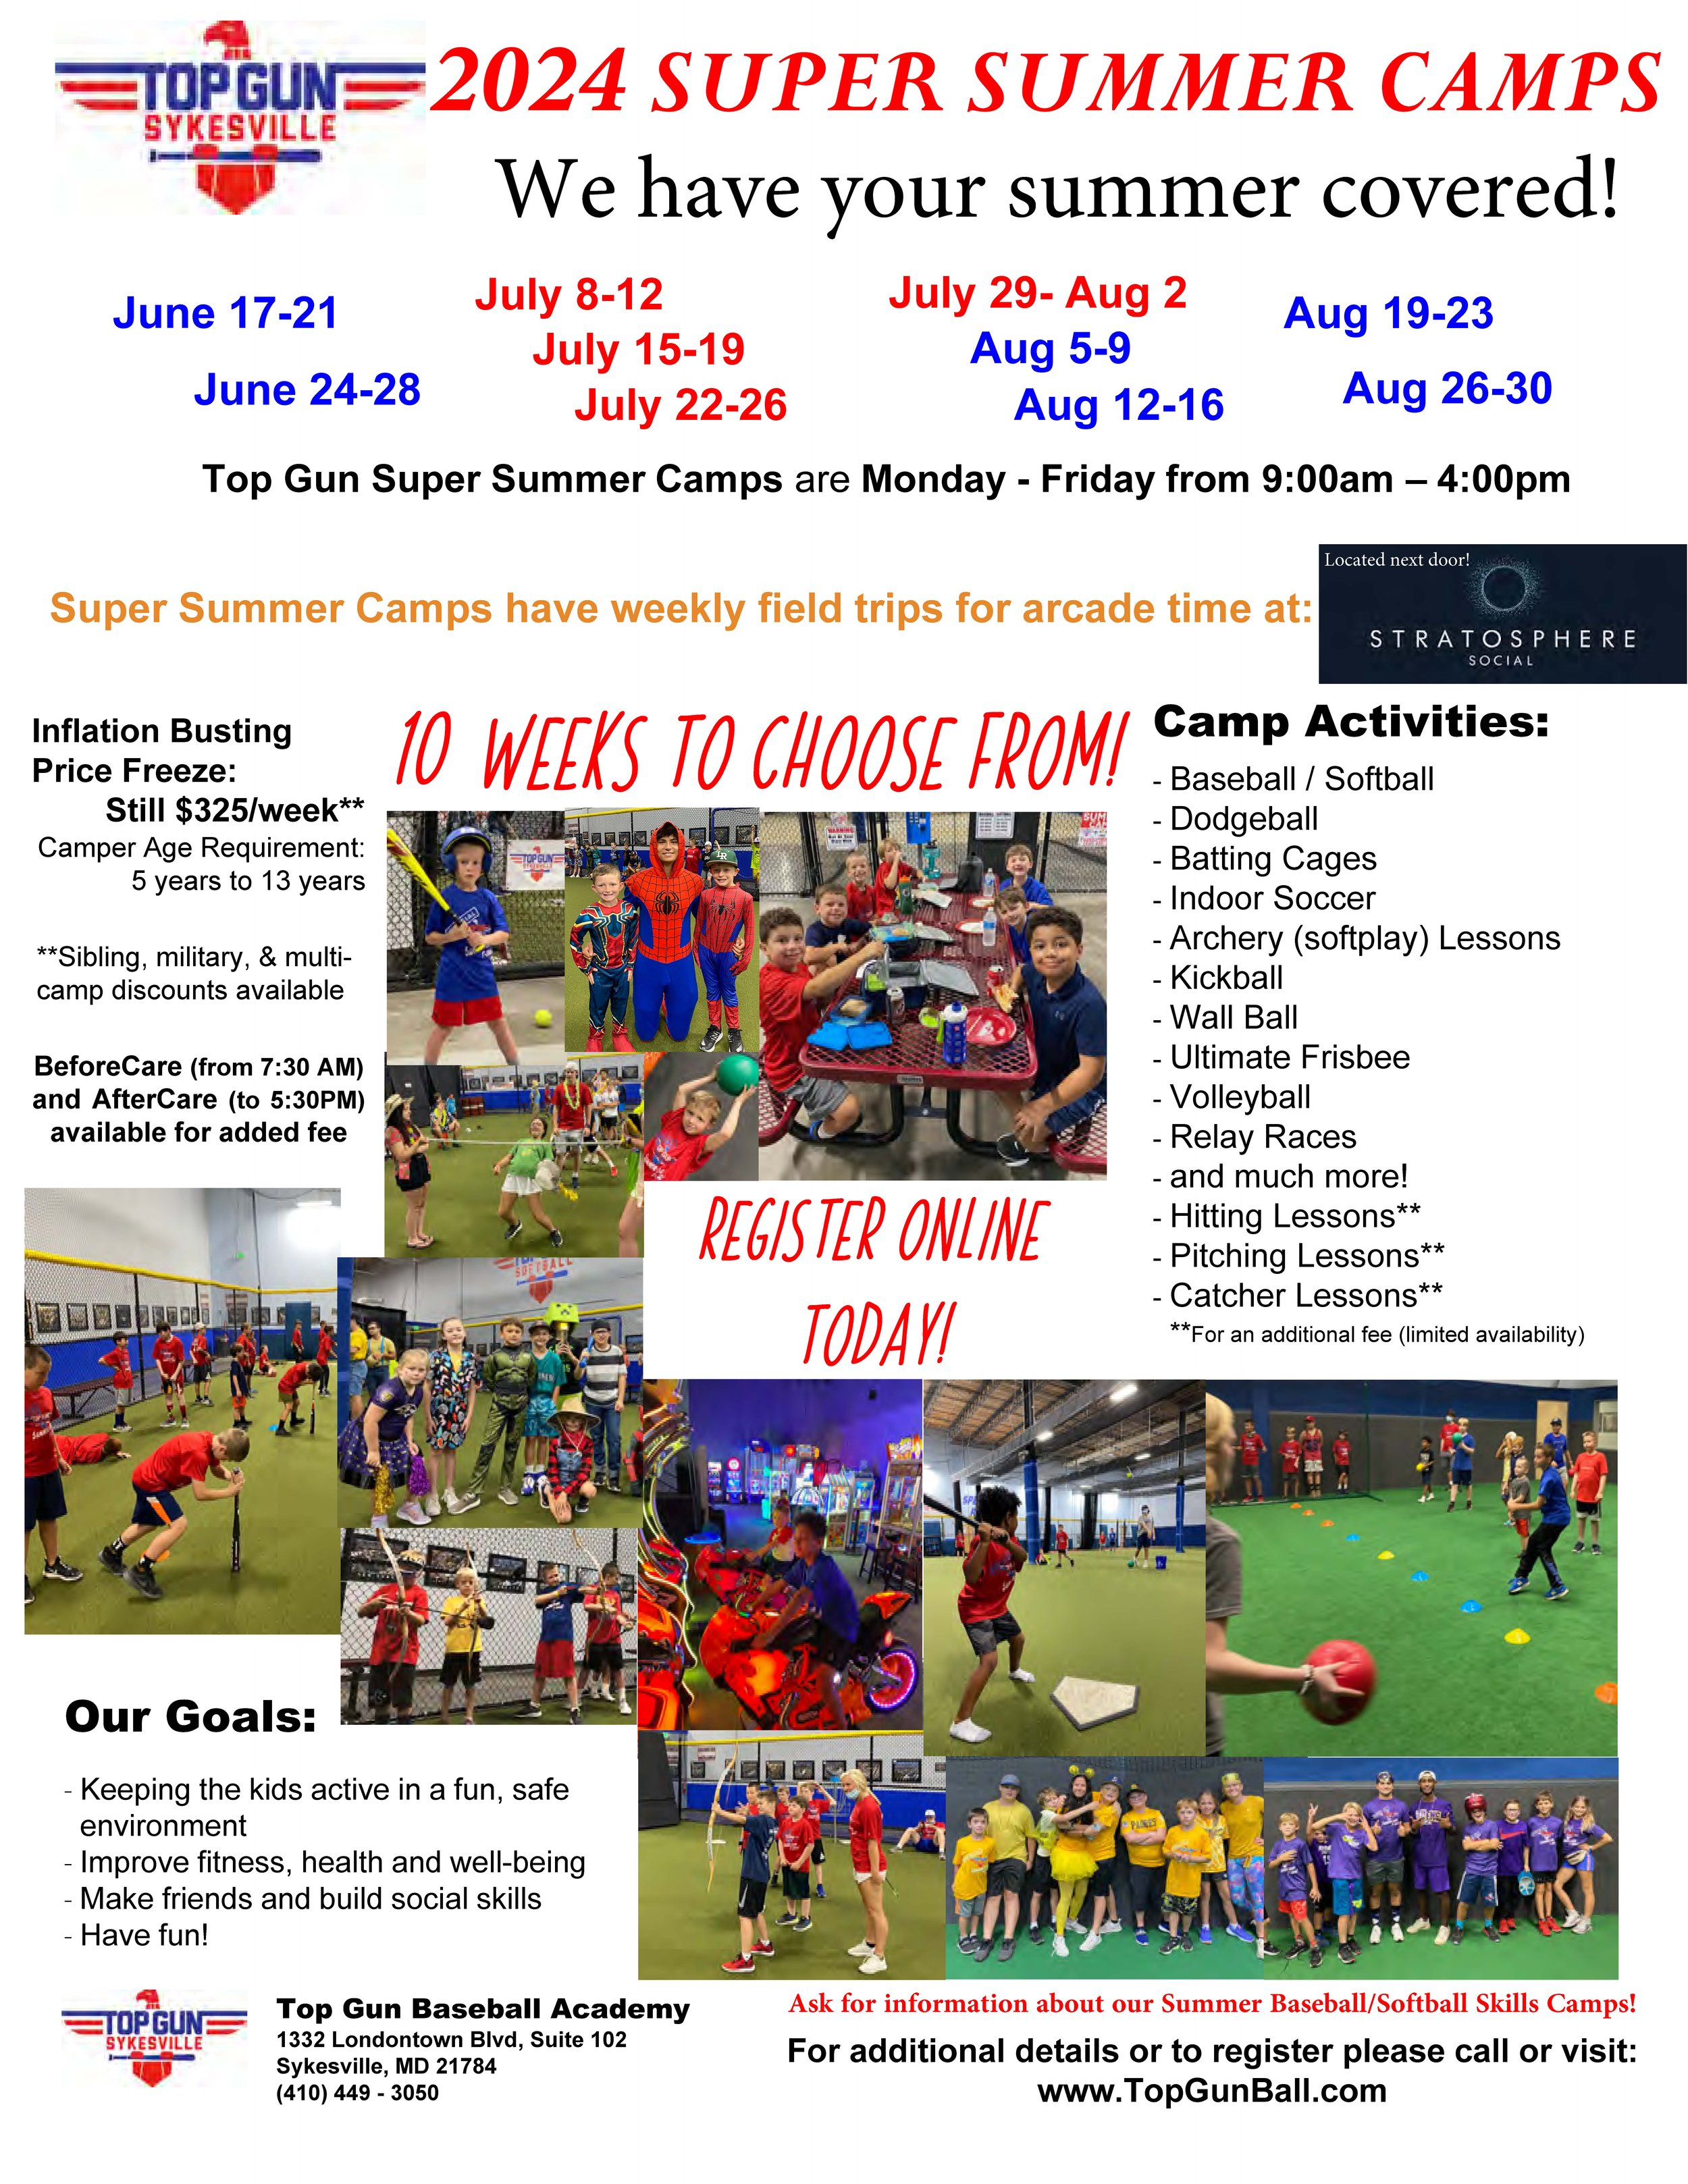 Super Summer Camps 2024 - 10 weeks to choose from.jpg